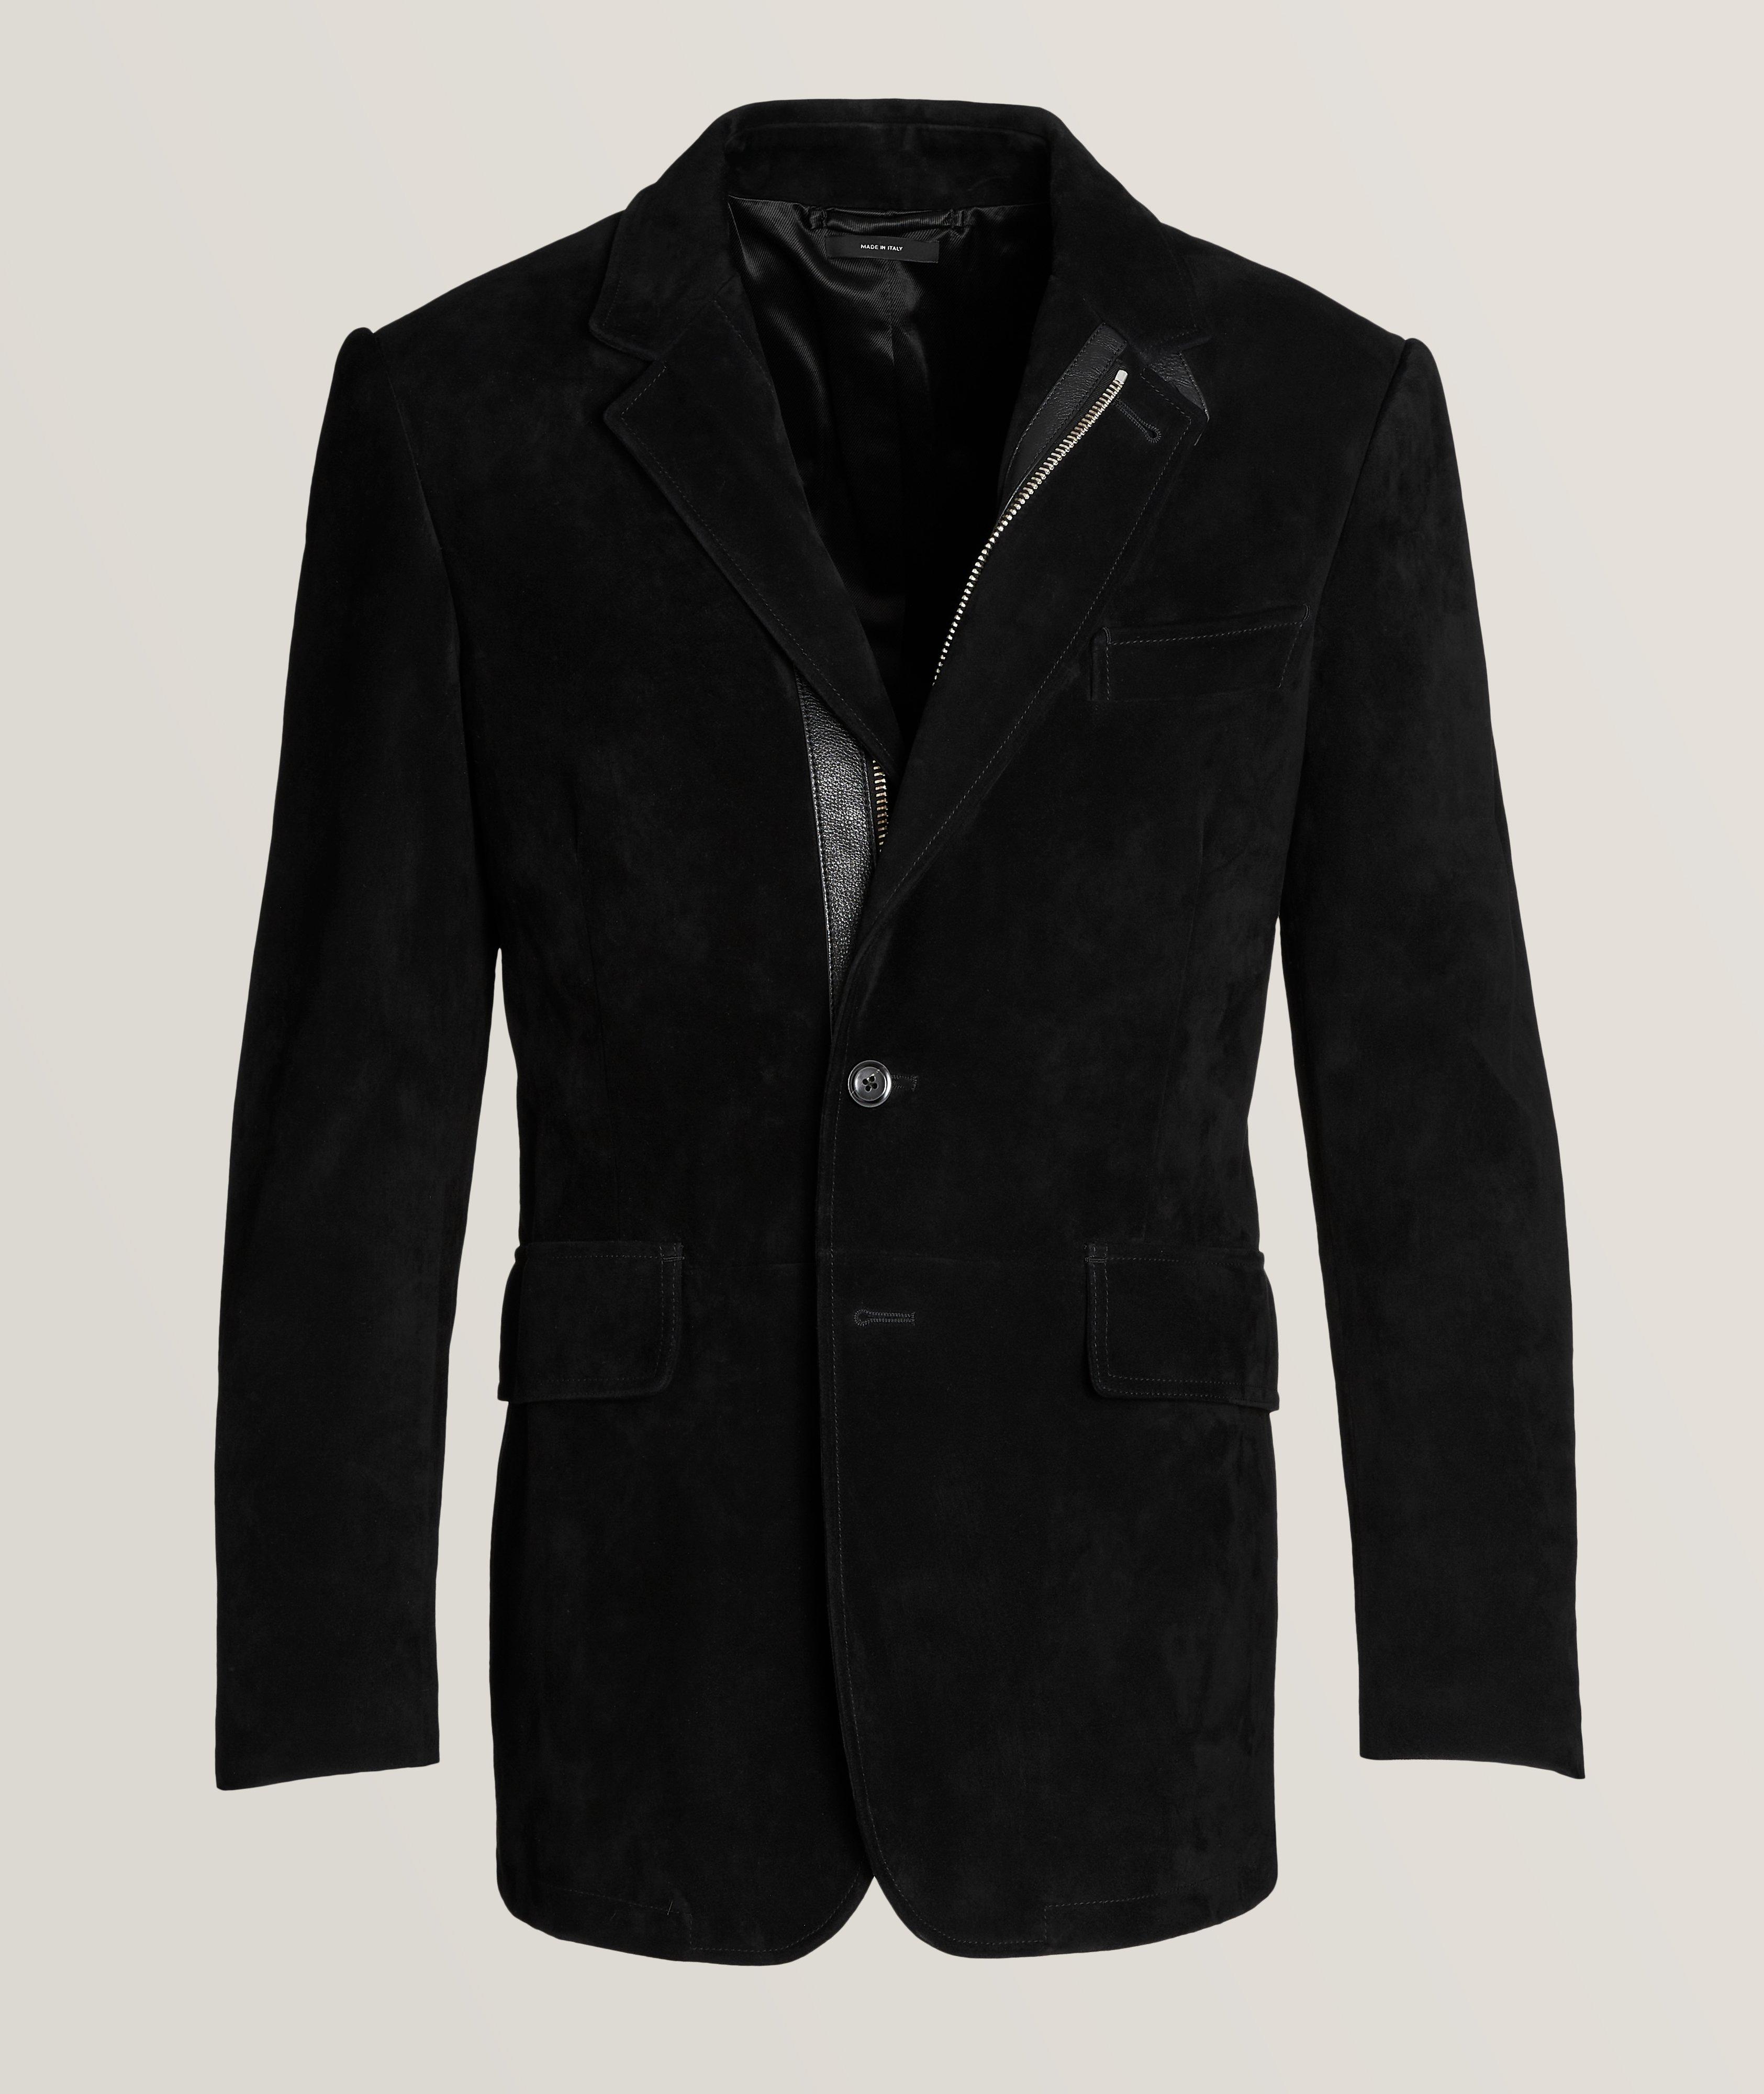 TOM FORD Sartorial Suede Leather Blazer | Leather | Harry Rosen